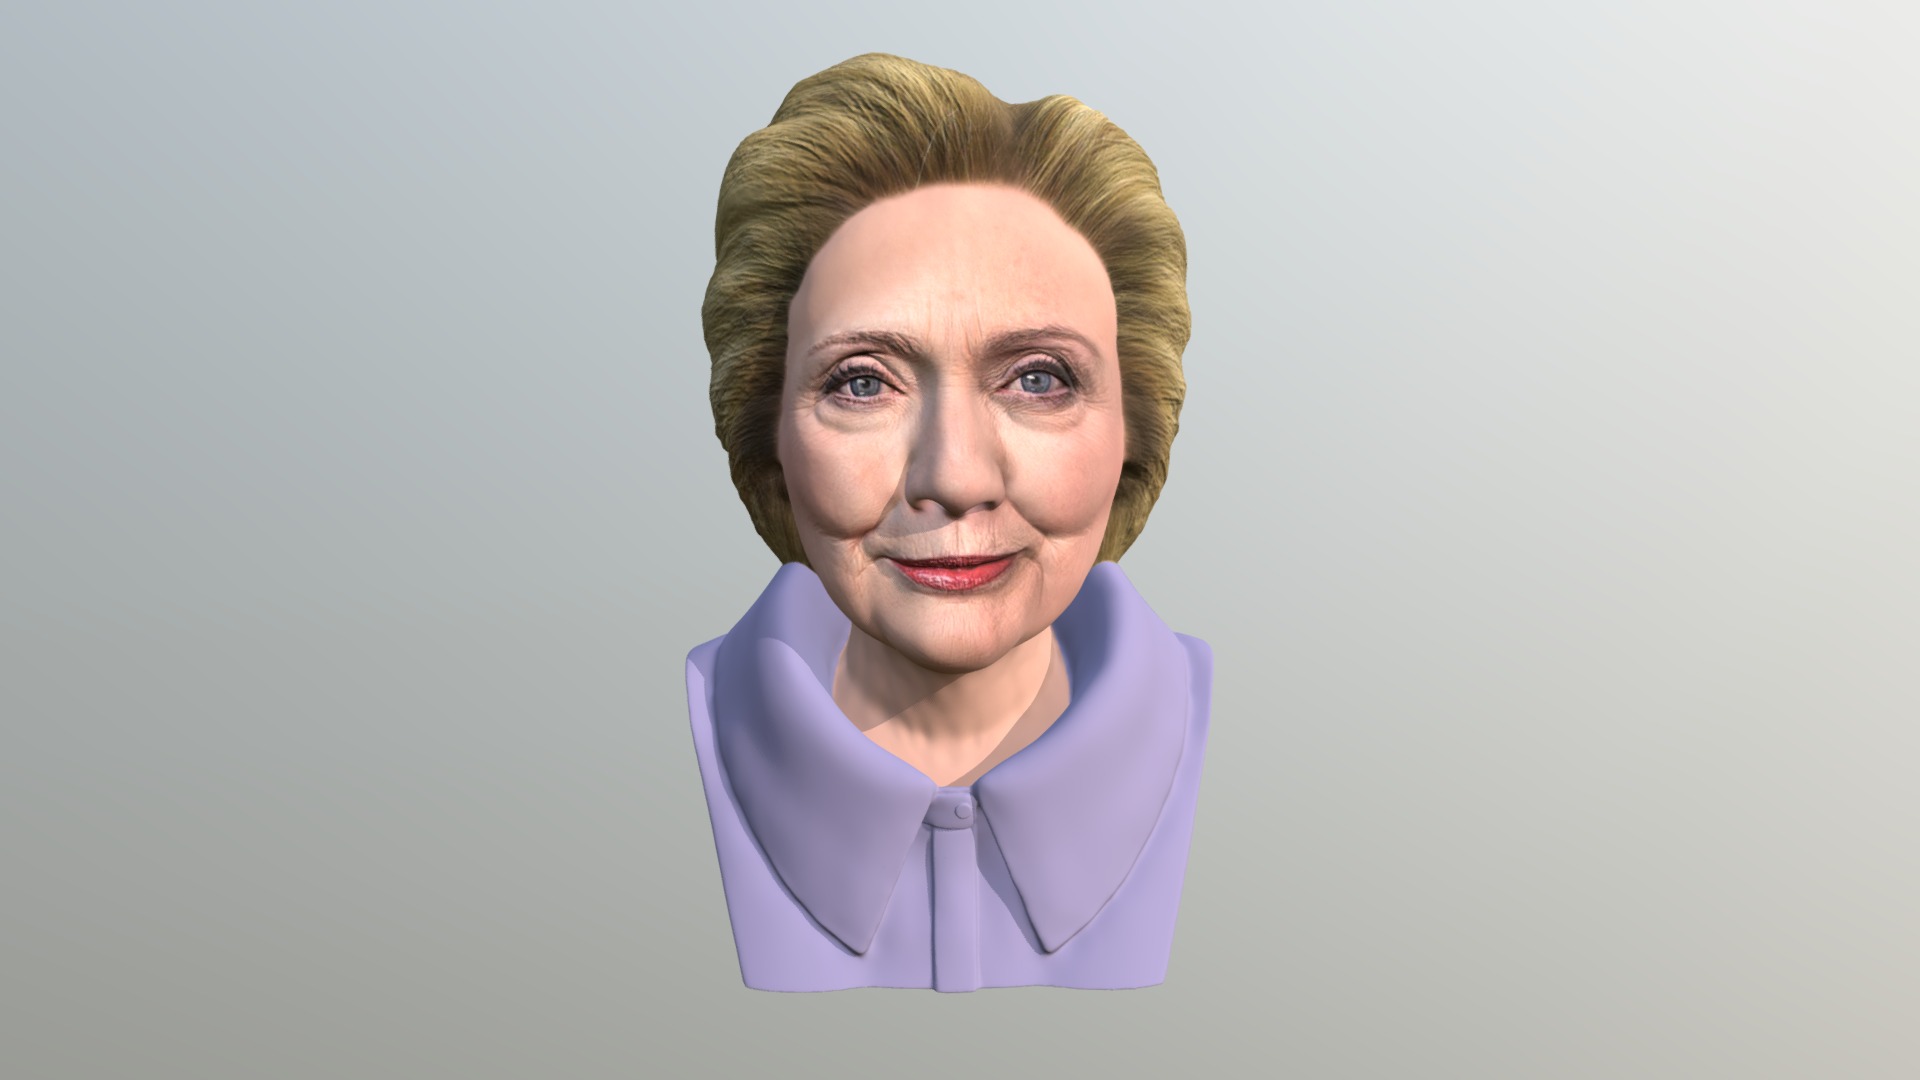 3D model Hillary Clinton for full color 3D printing - This is a 3D model of the Hillary Clinton for full color 3D printing. The 3D model is about a person with a purple shirt.